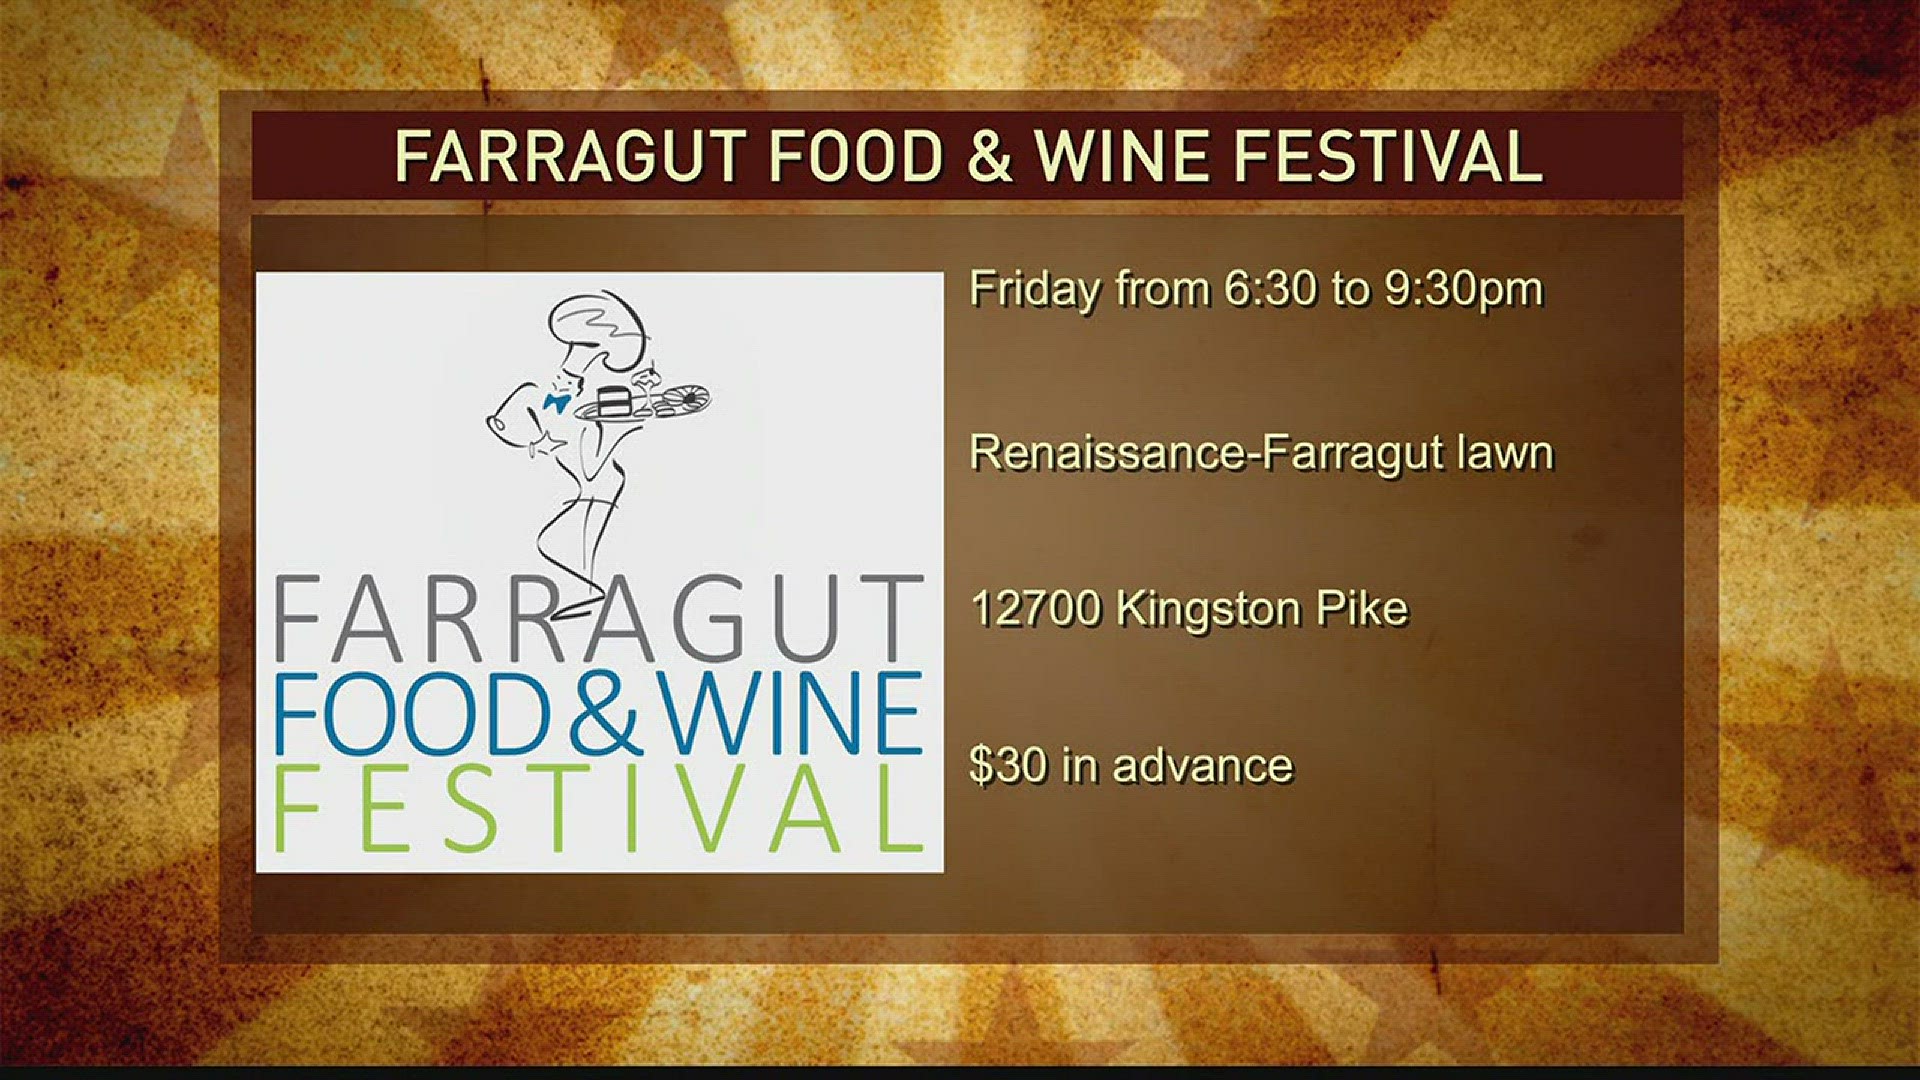 Farragut Food & Wine FestivalFriday, May 5th from 6:30-9:30pm on the lawn of Renaissance - Farragut at 12700 Kingston PikeTickets are $30 in advanceKnoxvilletickets.com or 865-656-4444May 1, 2017-Live at Five at 4